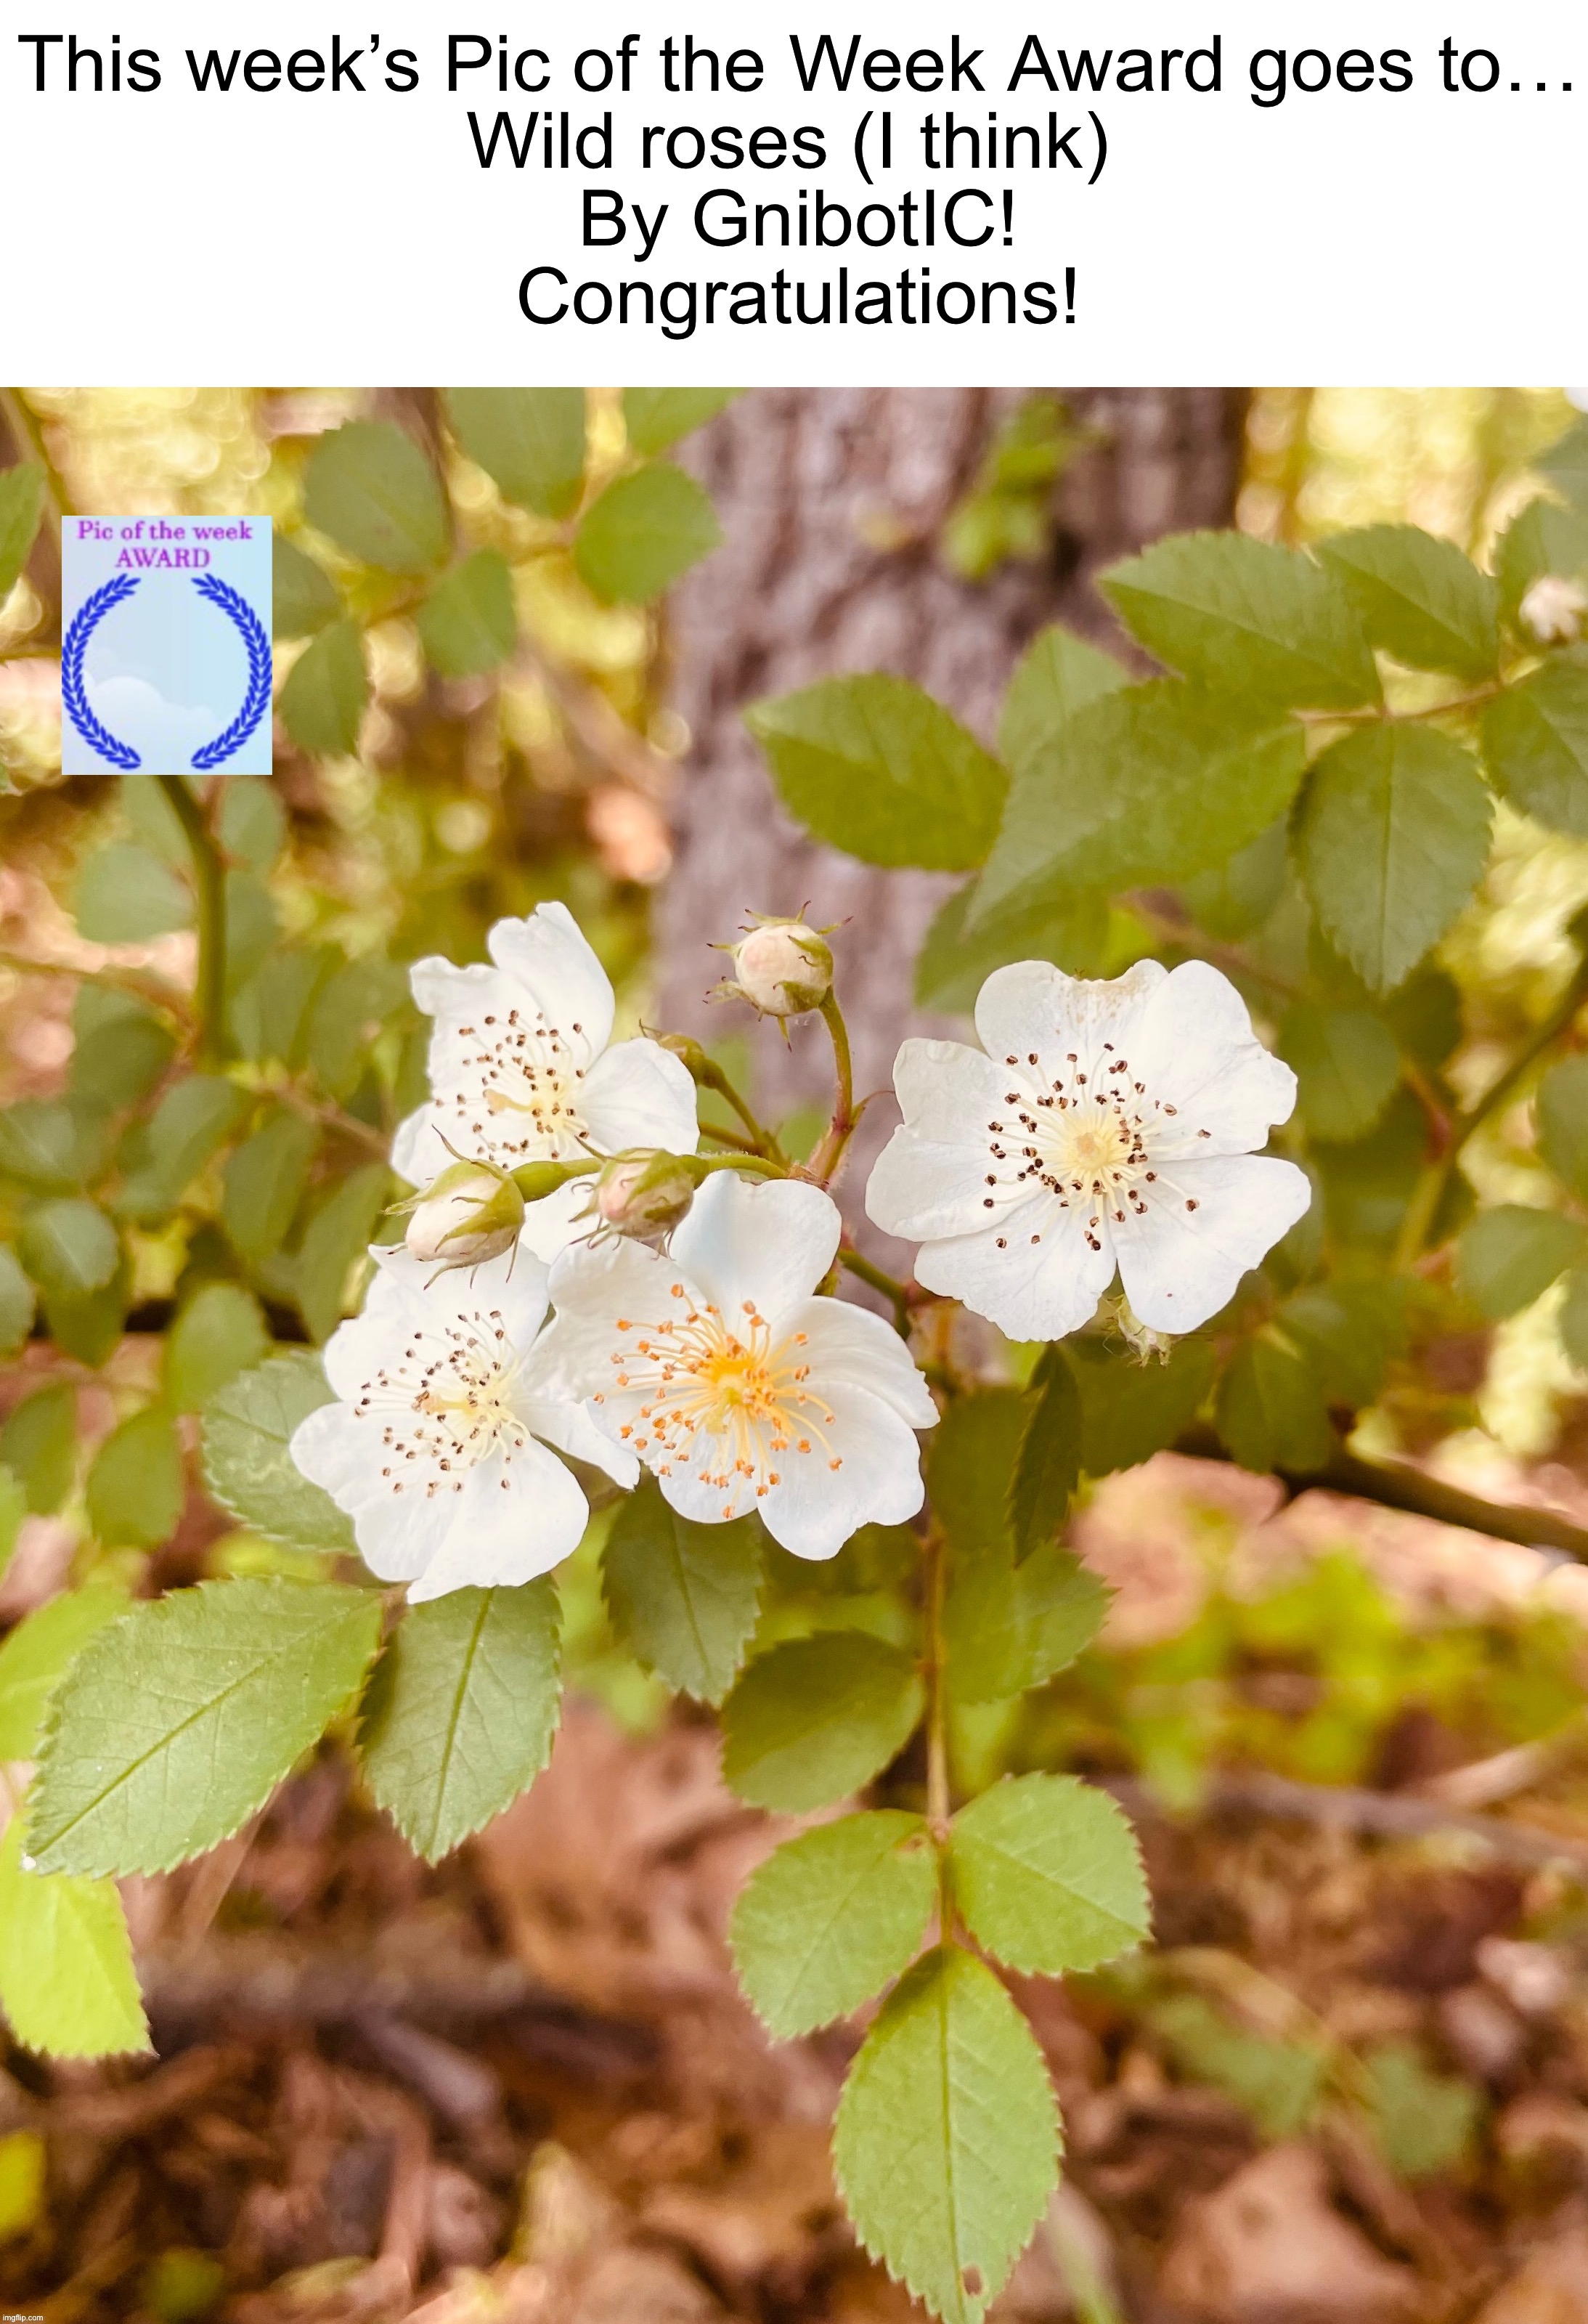 Wild roses by @GnibotIC https://imgflip.com/i/7k225z | This week’s Pic of the Week Award goes to…
Wild roses (I think) 
By GnibotIC!
Congratulations! | image tagged in share your own photos | made w/ Imgflip meme maker